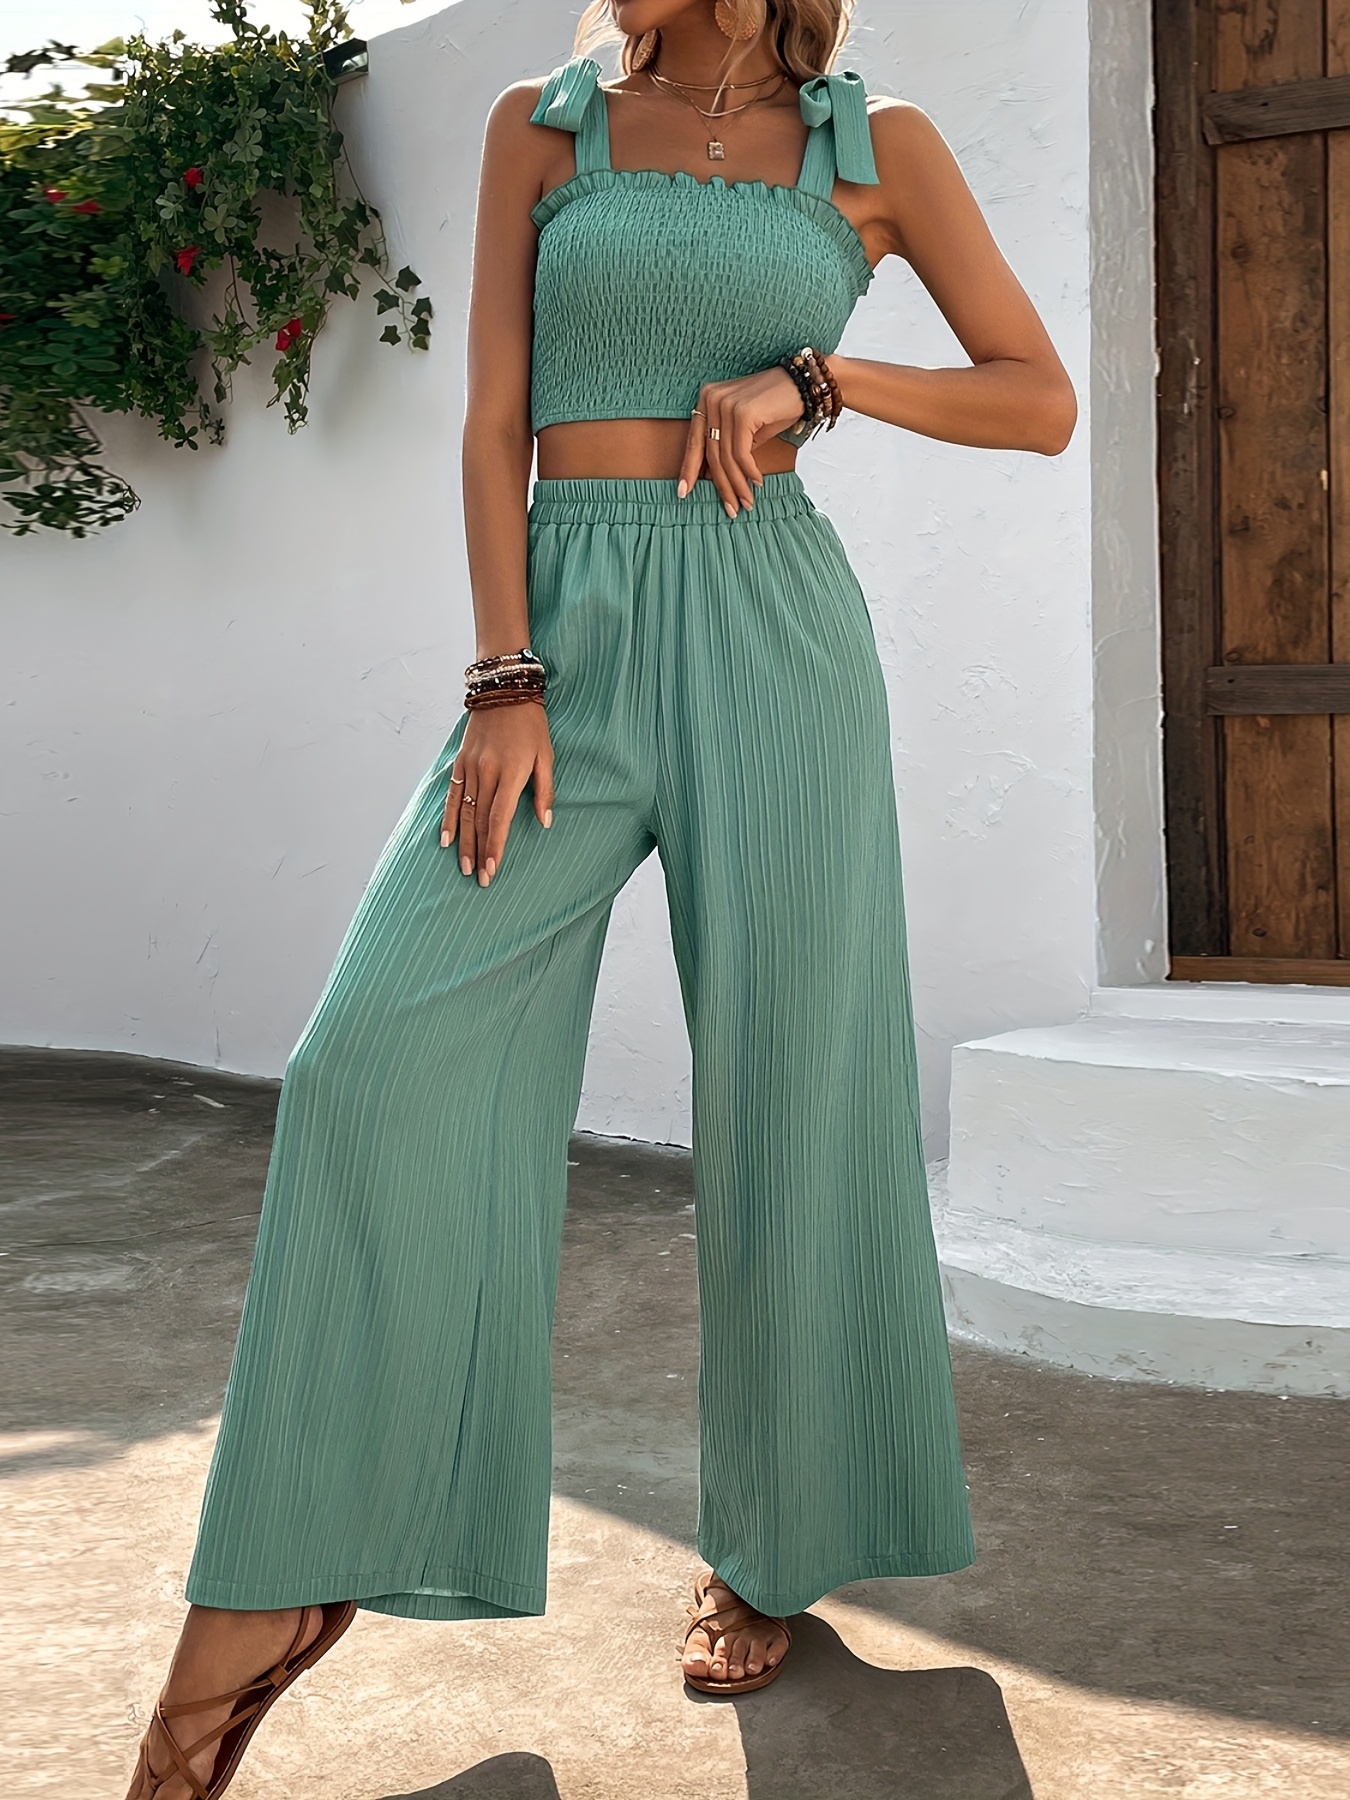 Wide-Leg - matching these pants with other clothes